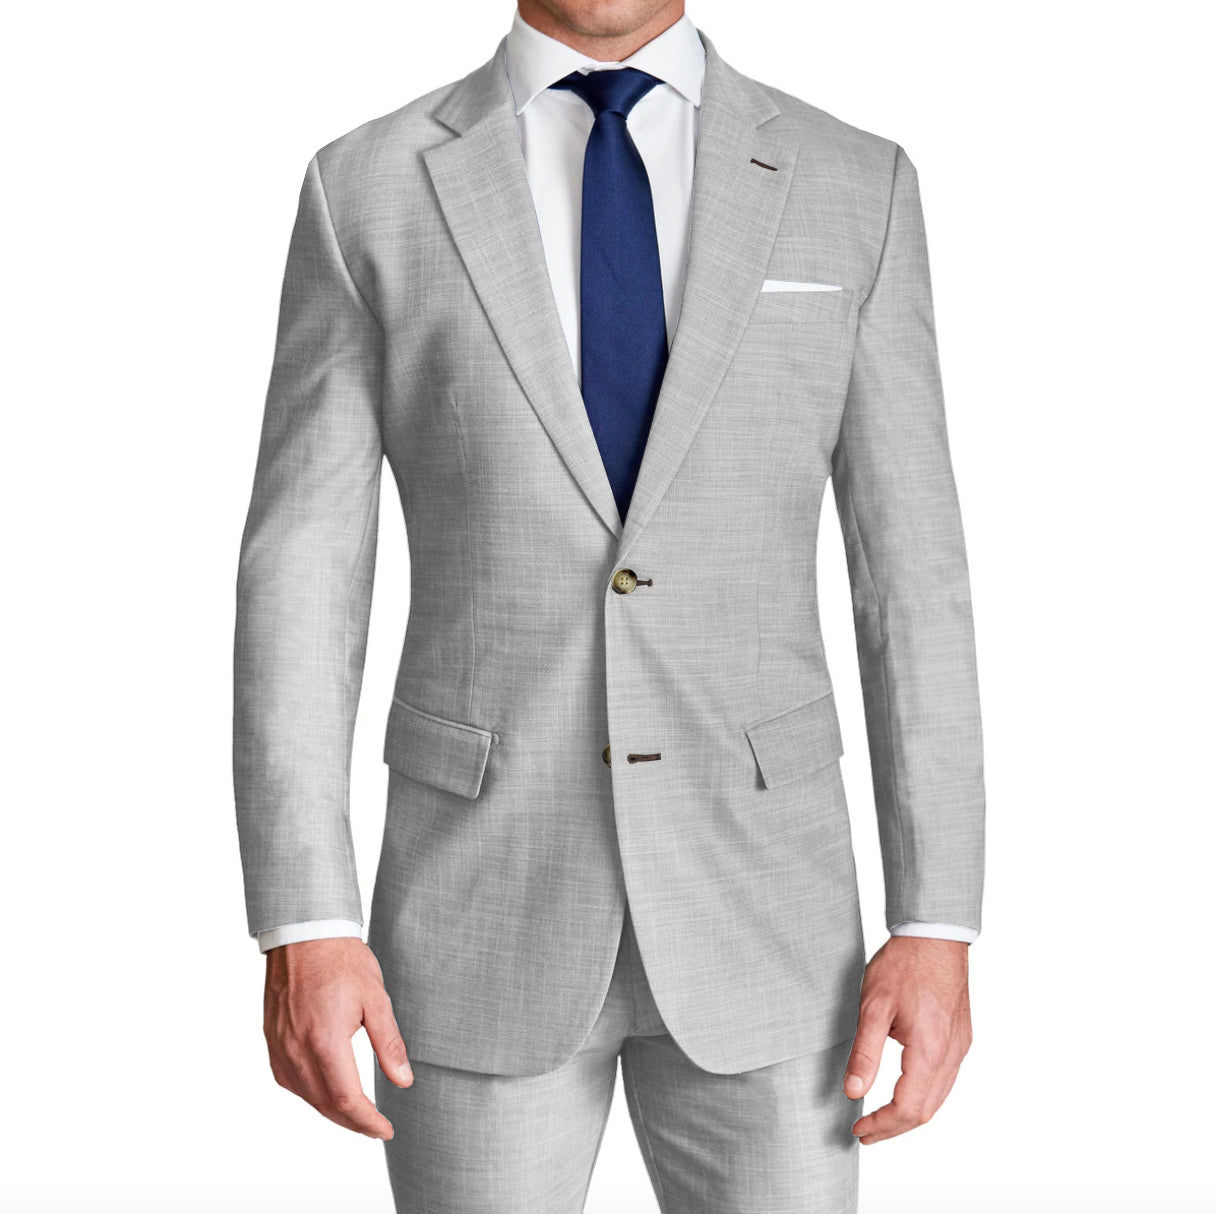 Athletic Fit Blazer - Lightweight Light Grey - and Liberty Clothing